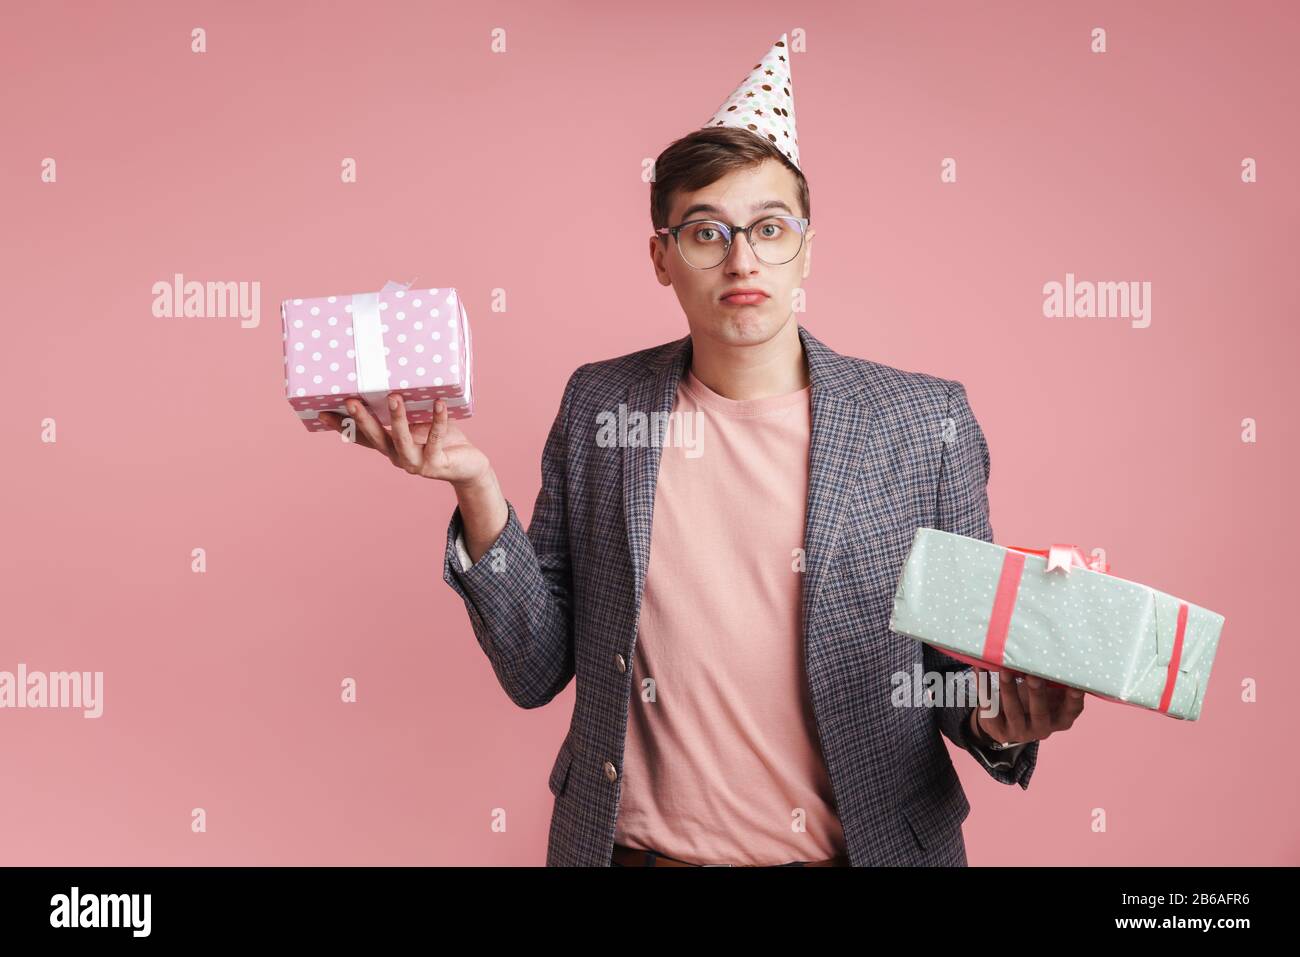 Image of a confused young guy in glasses holding birthday present gift ...